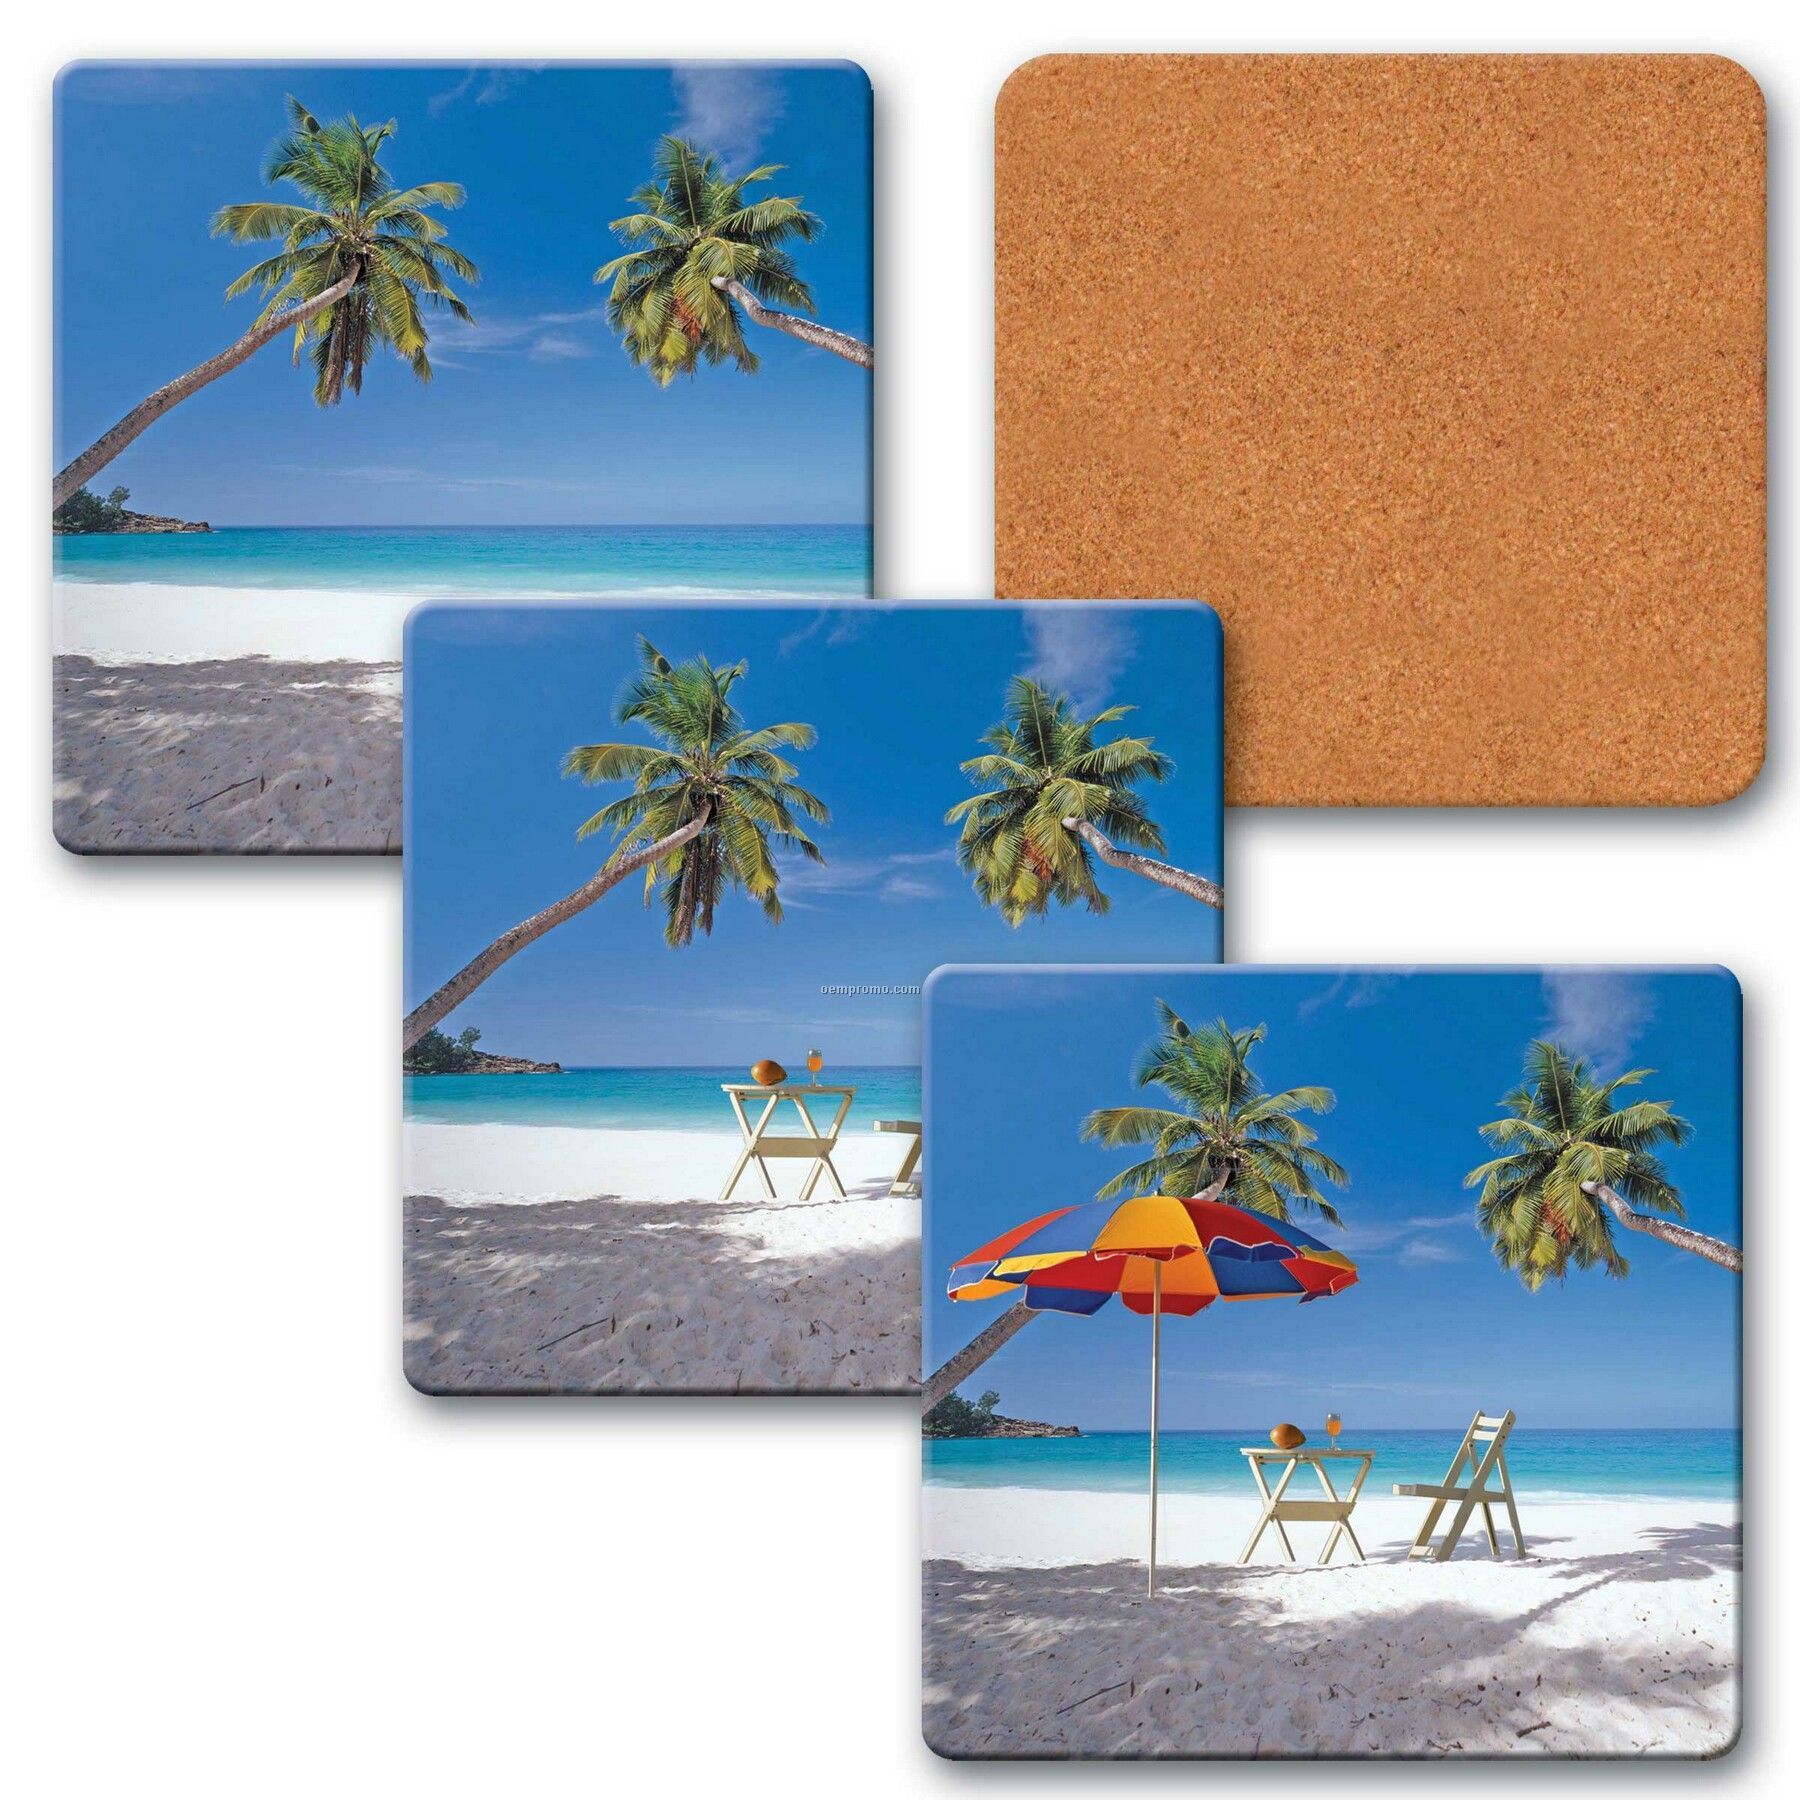 4" Square Coaster W/3d Lenticular Images Of A Tropical Beach (Blanks)